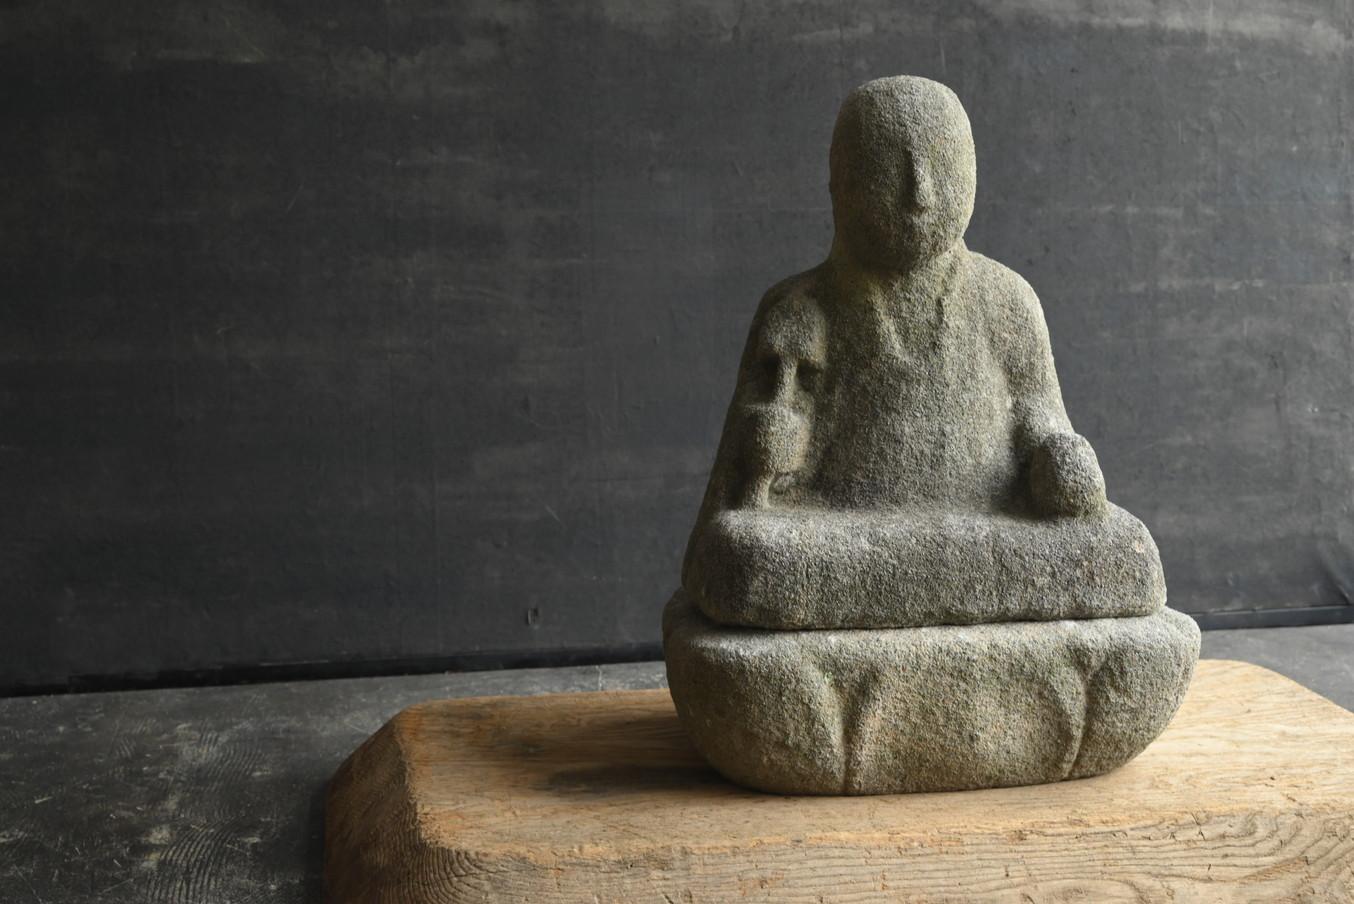 I would like to introduce you to a wonderful stone Buddha made during the Edo period in Japan.
This is a stone Buddha made from the middle to late Edo period (around 1700 to 1850).

The name is Jizo Bodhisattva.
Jizo is one of the Bodhisattvas in